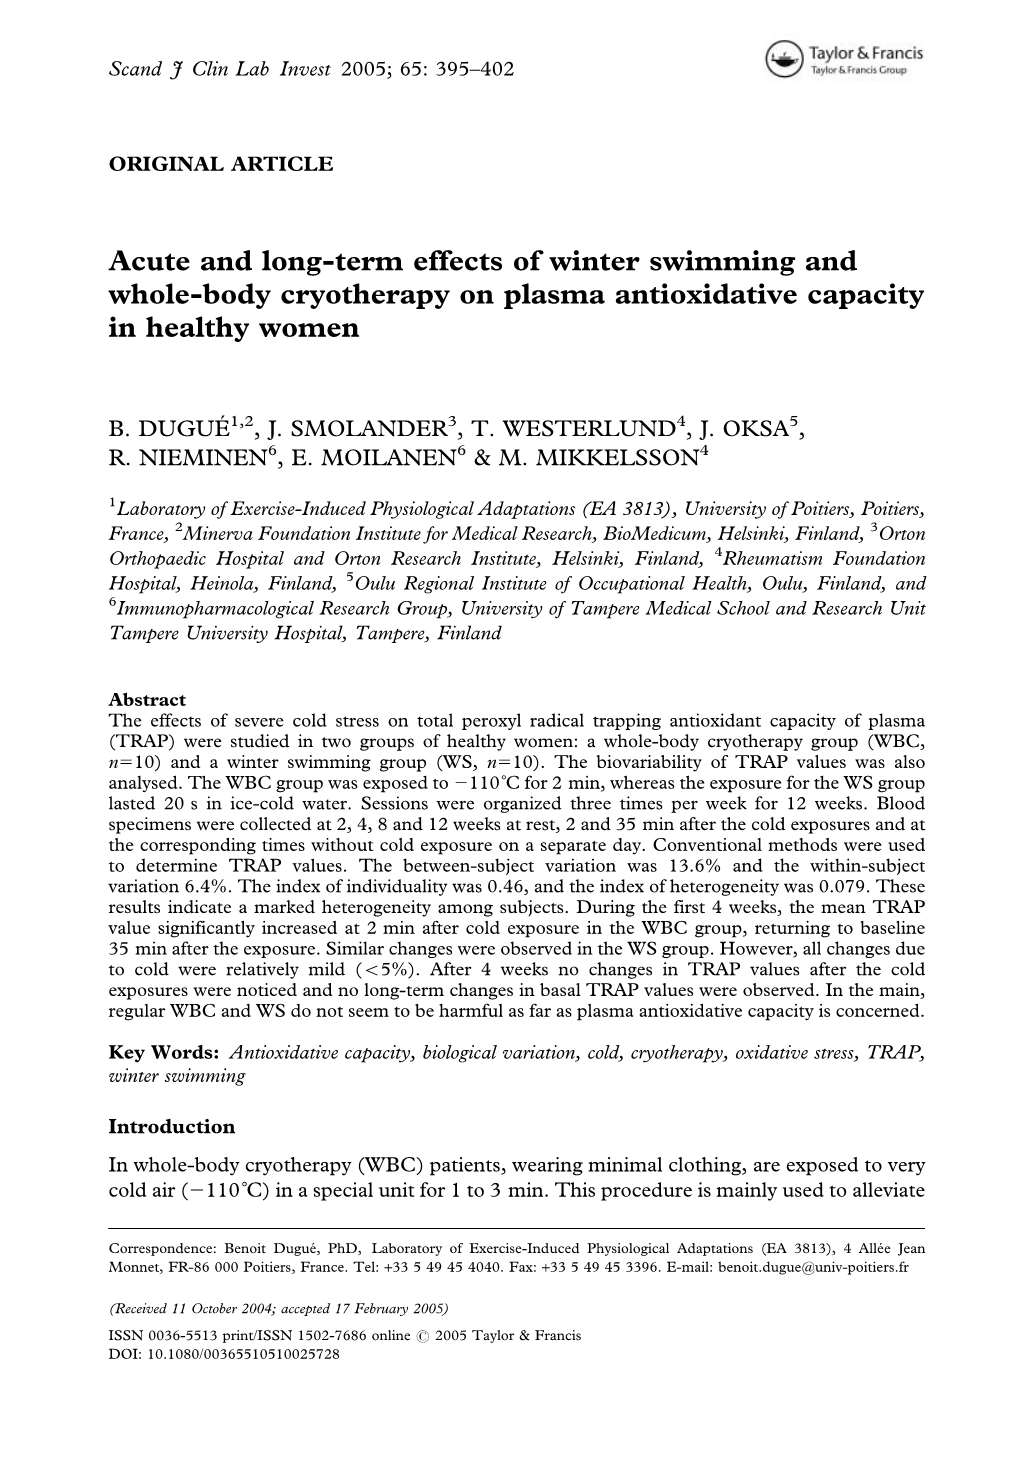 Acute and Long-Term Effects of Winter Swimming and Whole-Body Cryotherapy on Plasma Antioxidative Capacity in Healthy Women